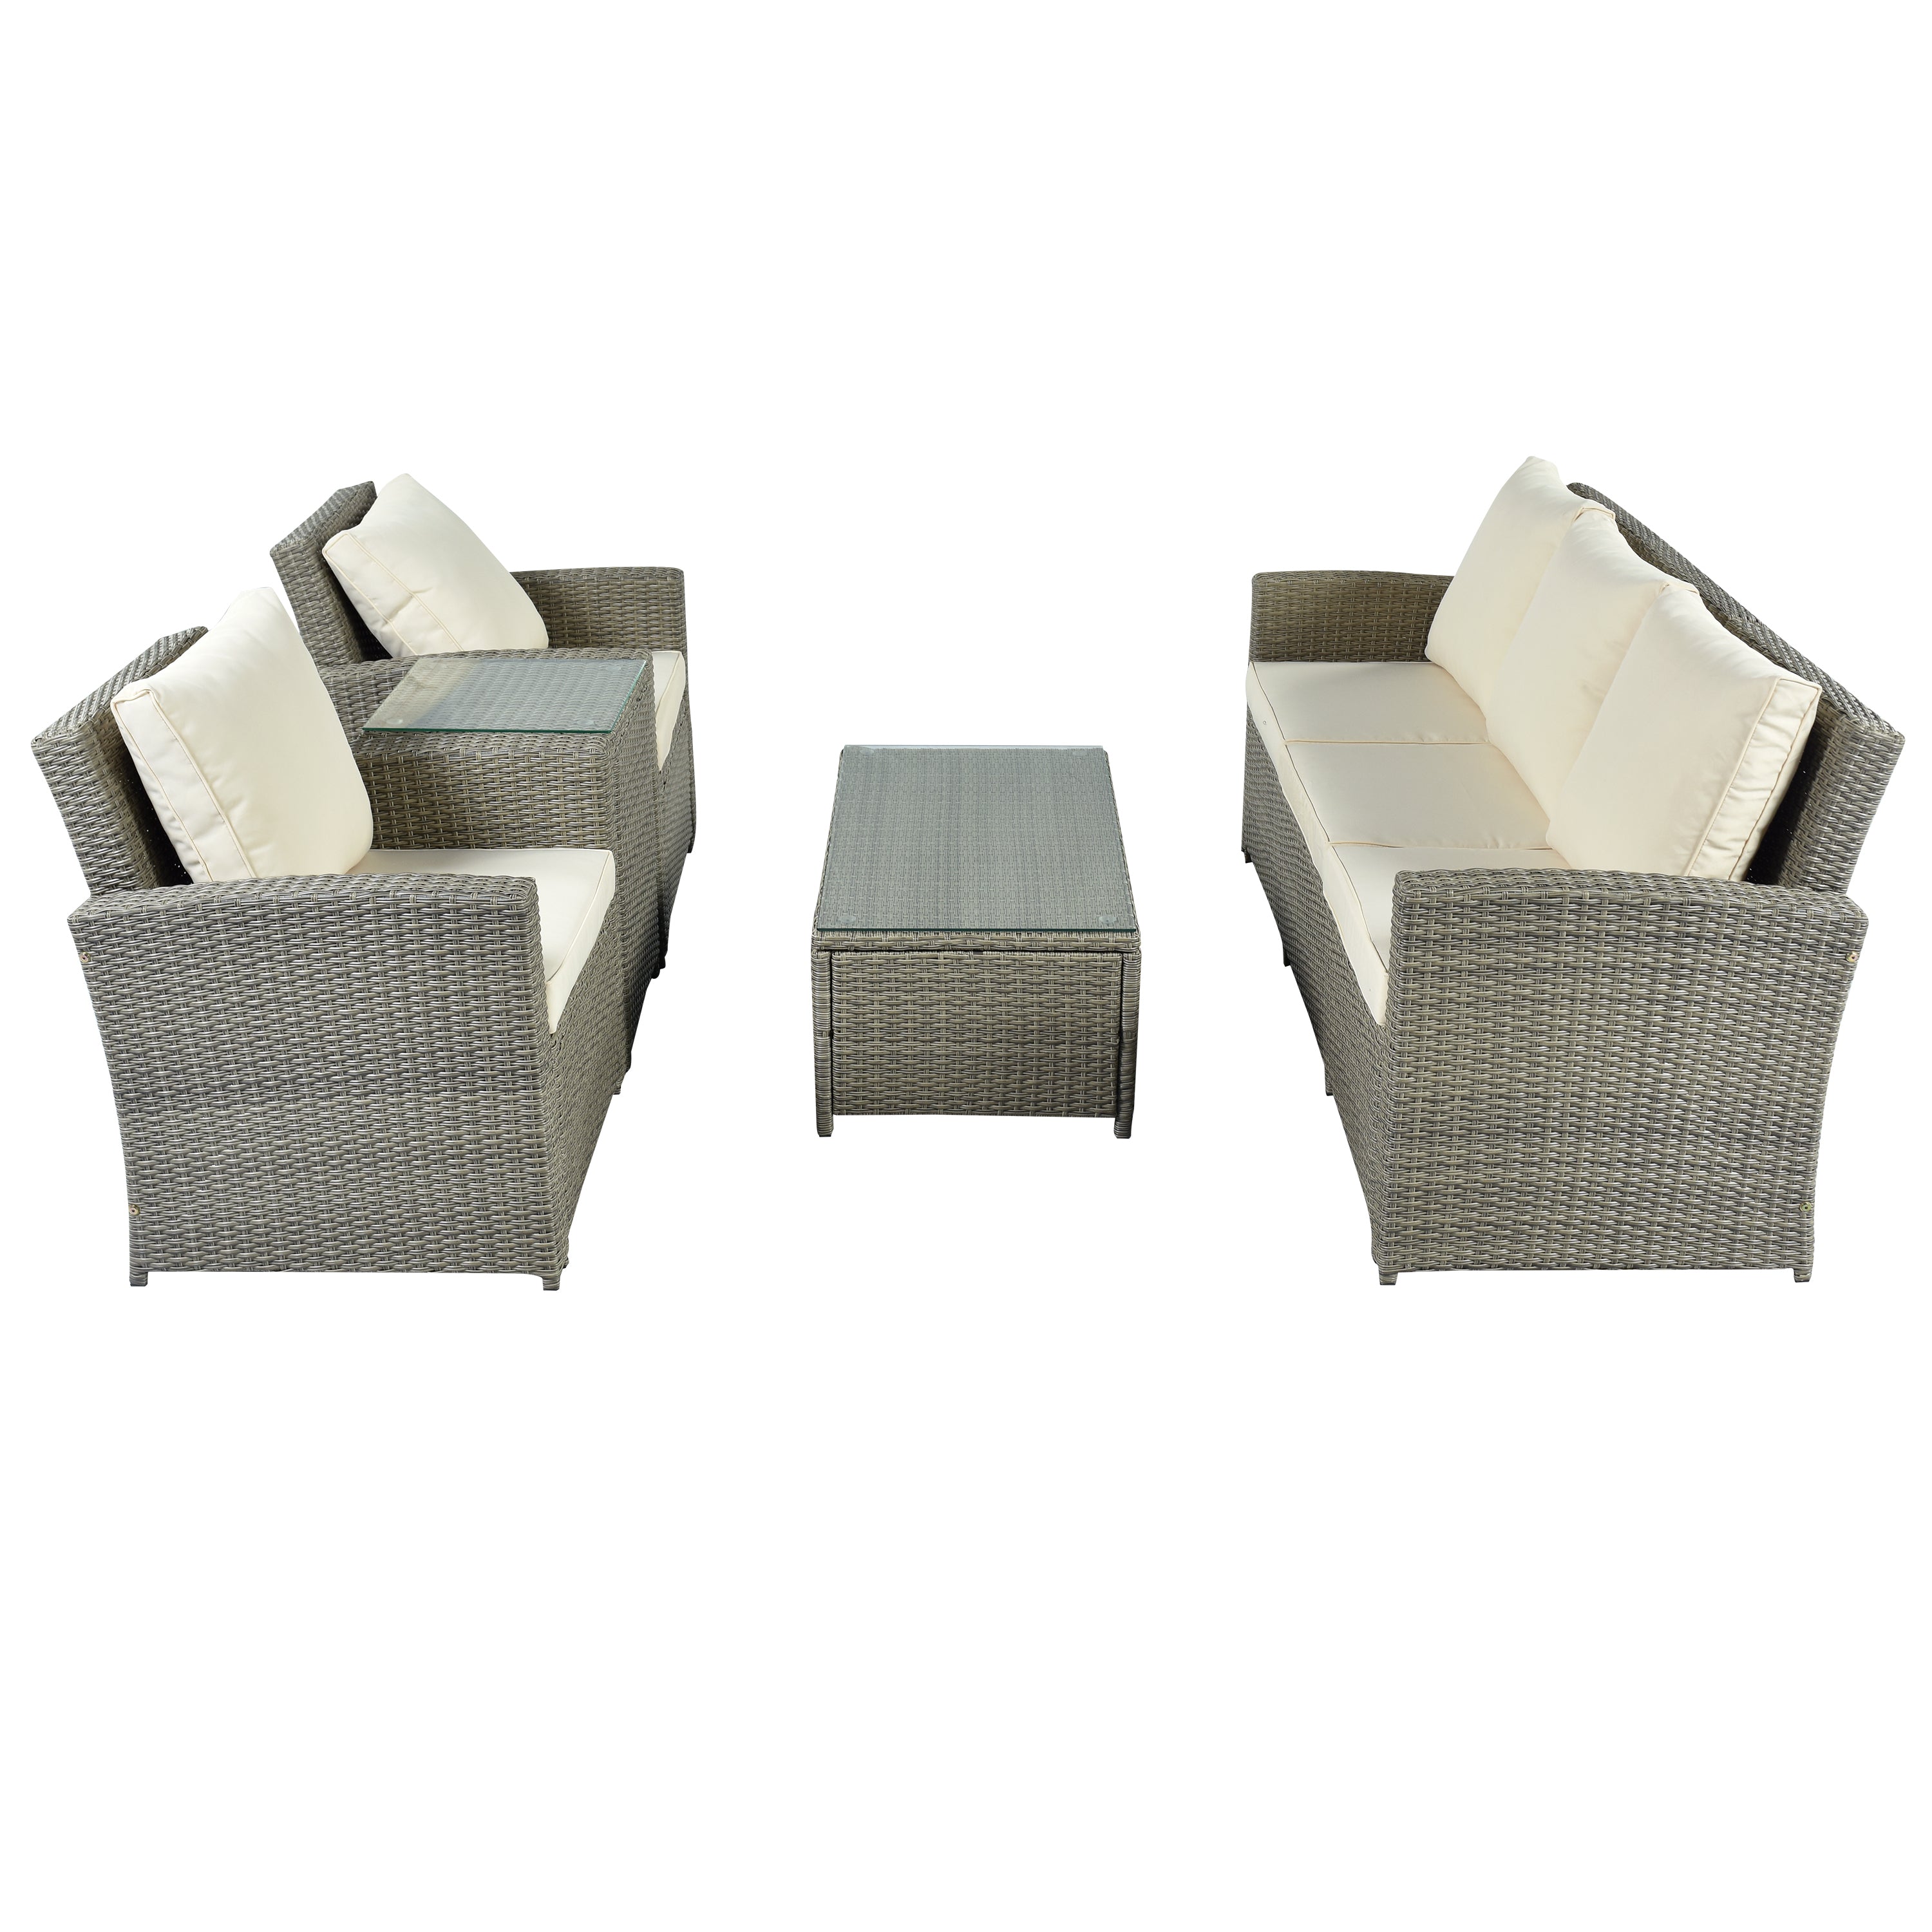 5 Piece Rattan Sectional Seating Group with Cushions and table, Patio Furniture Sets, Outdoor Wicker Sectional - Beige